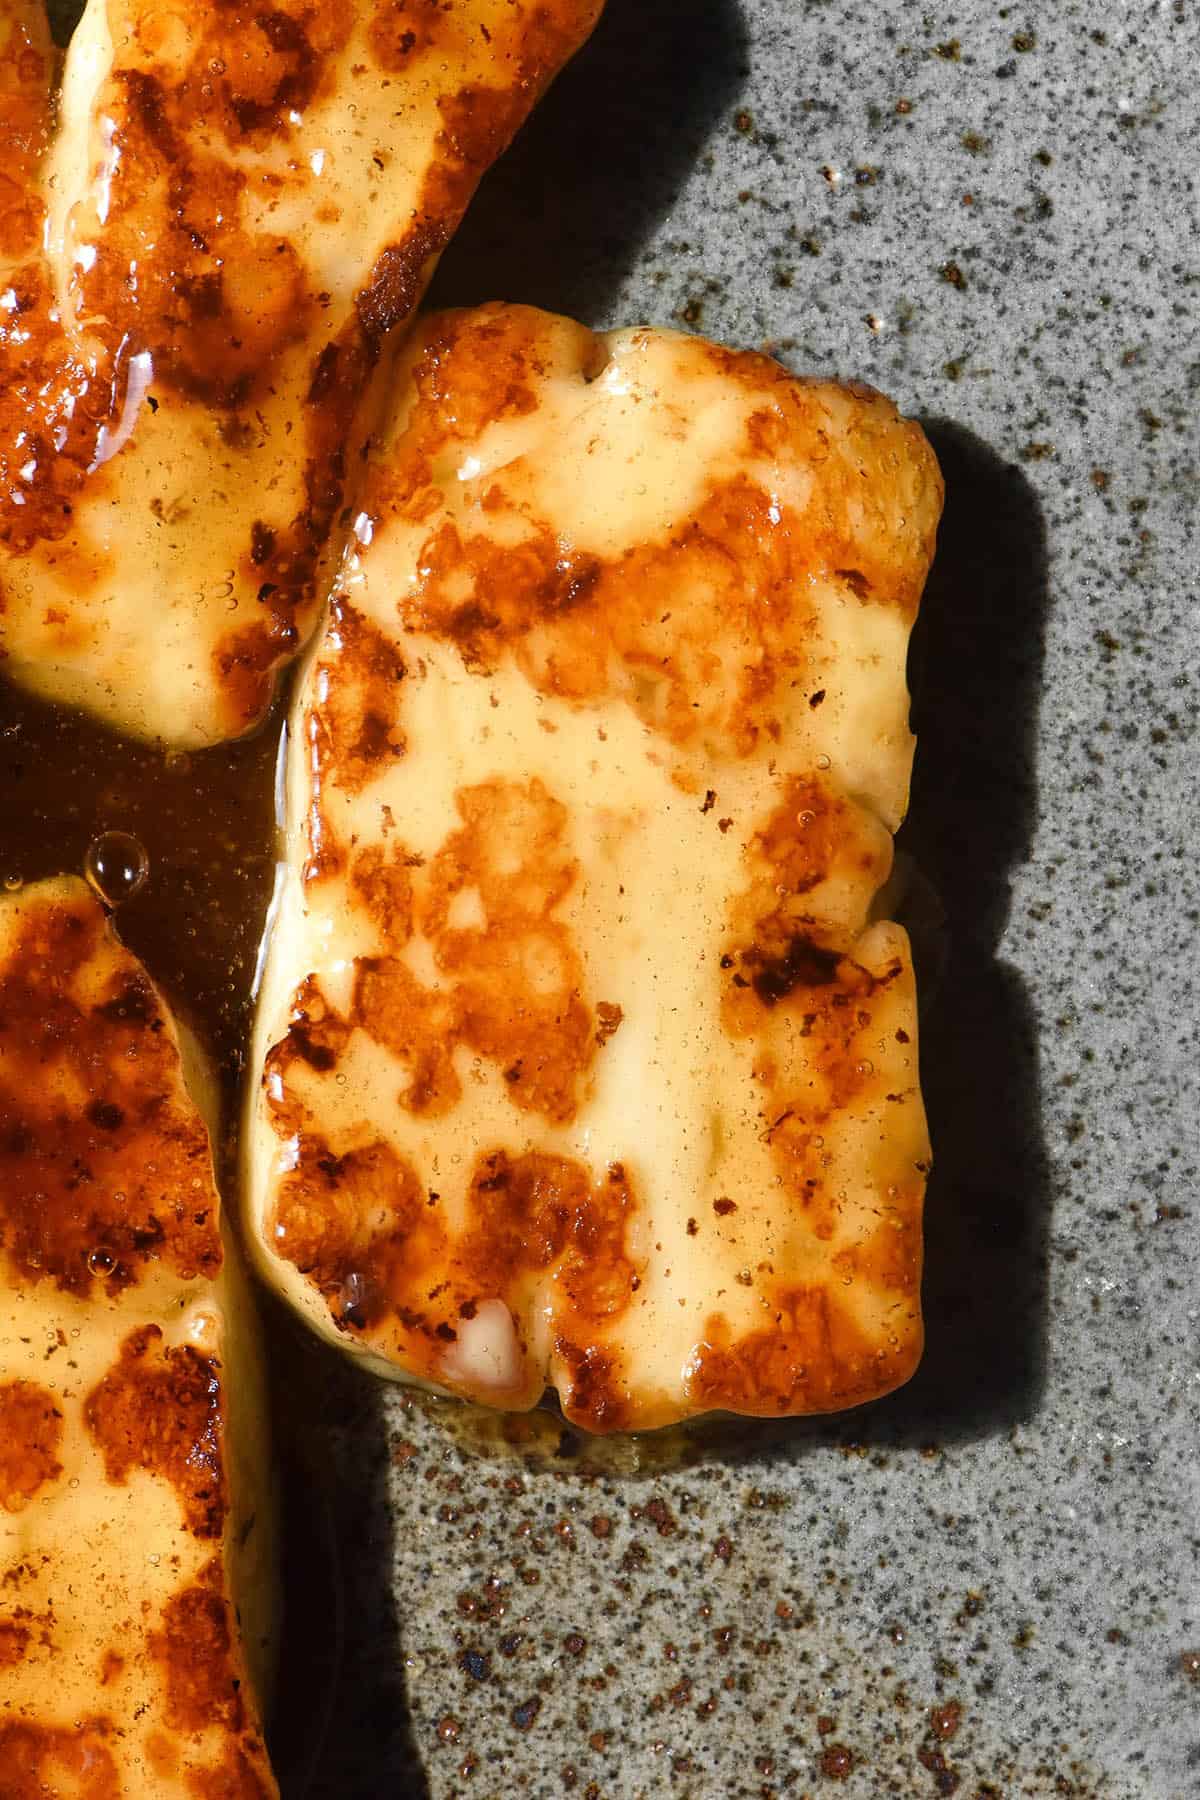 An aerial image of golden brown honey glazed halloumi on a dark blue speckled ceramic plate